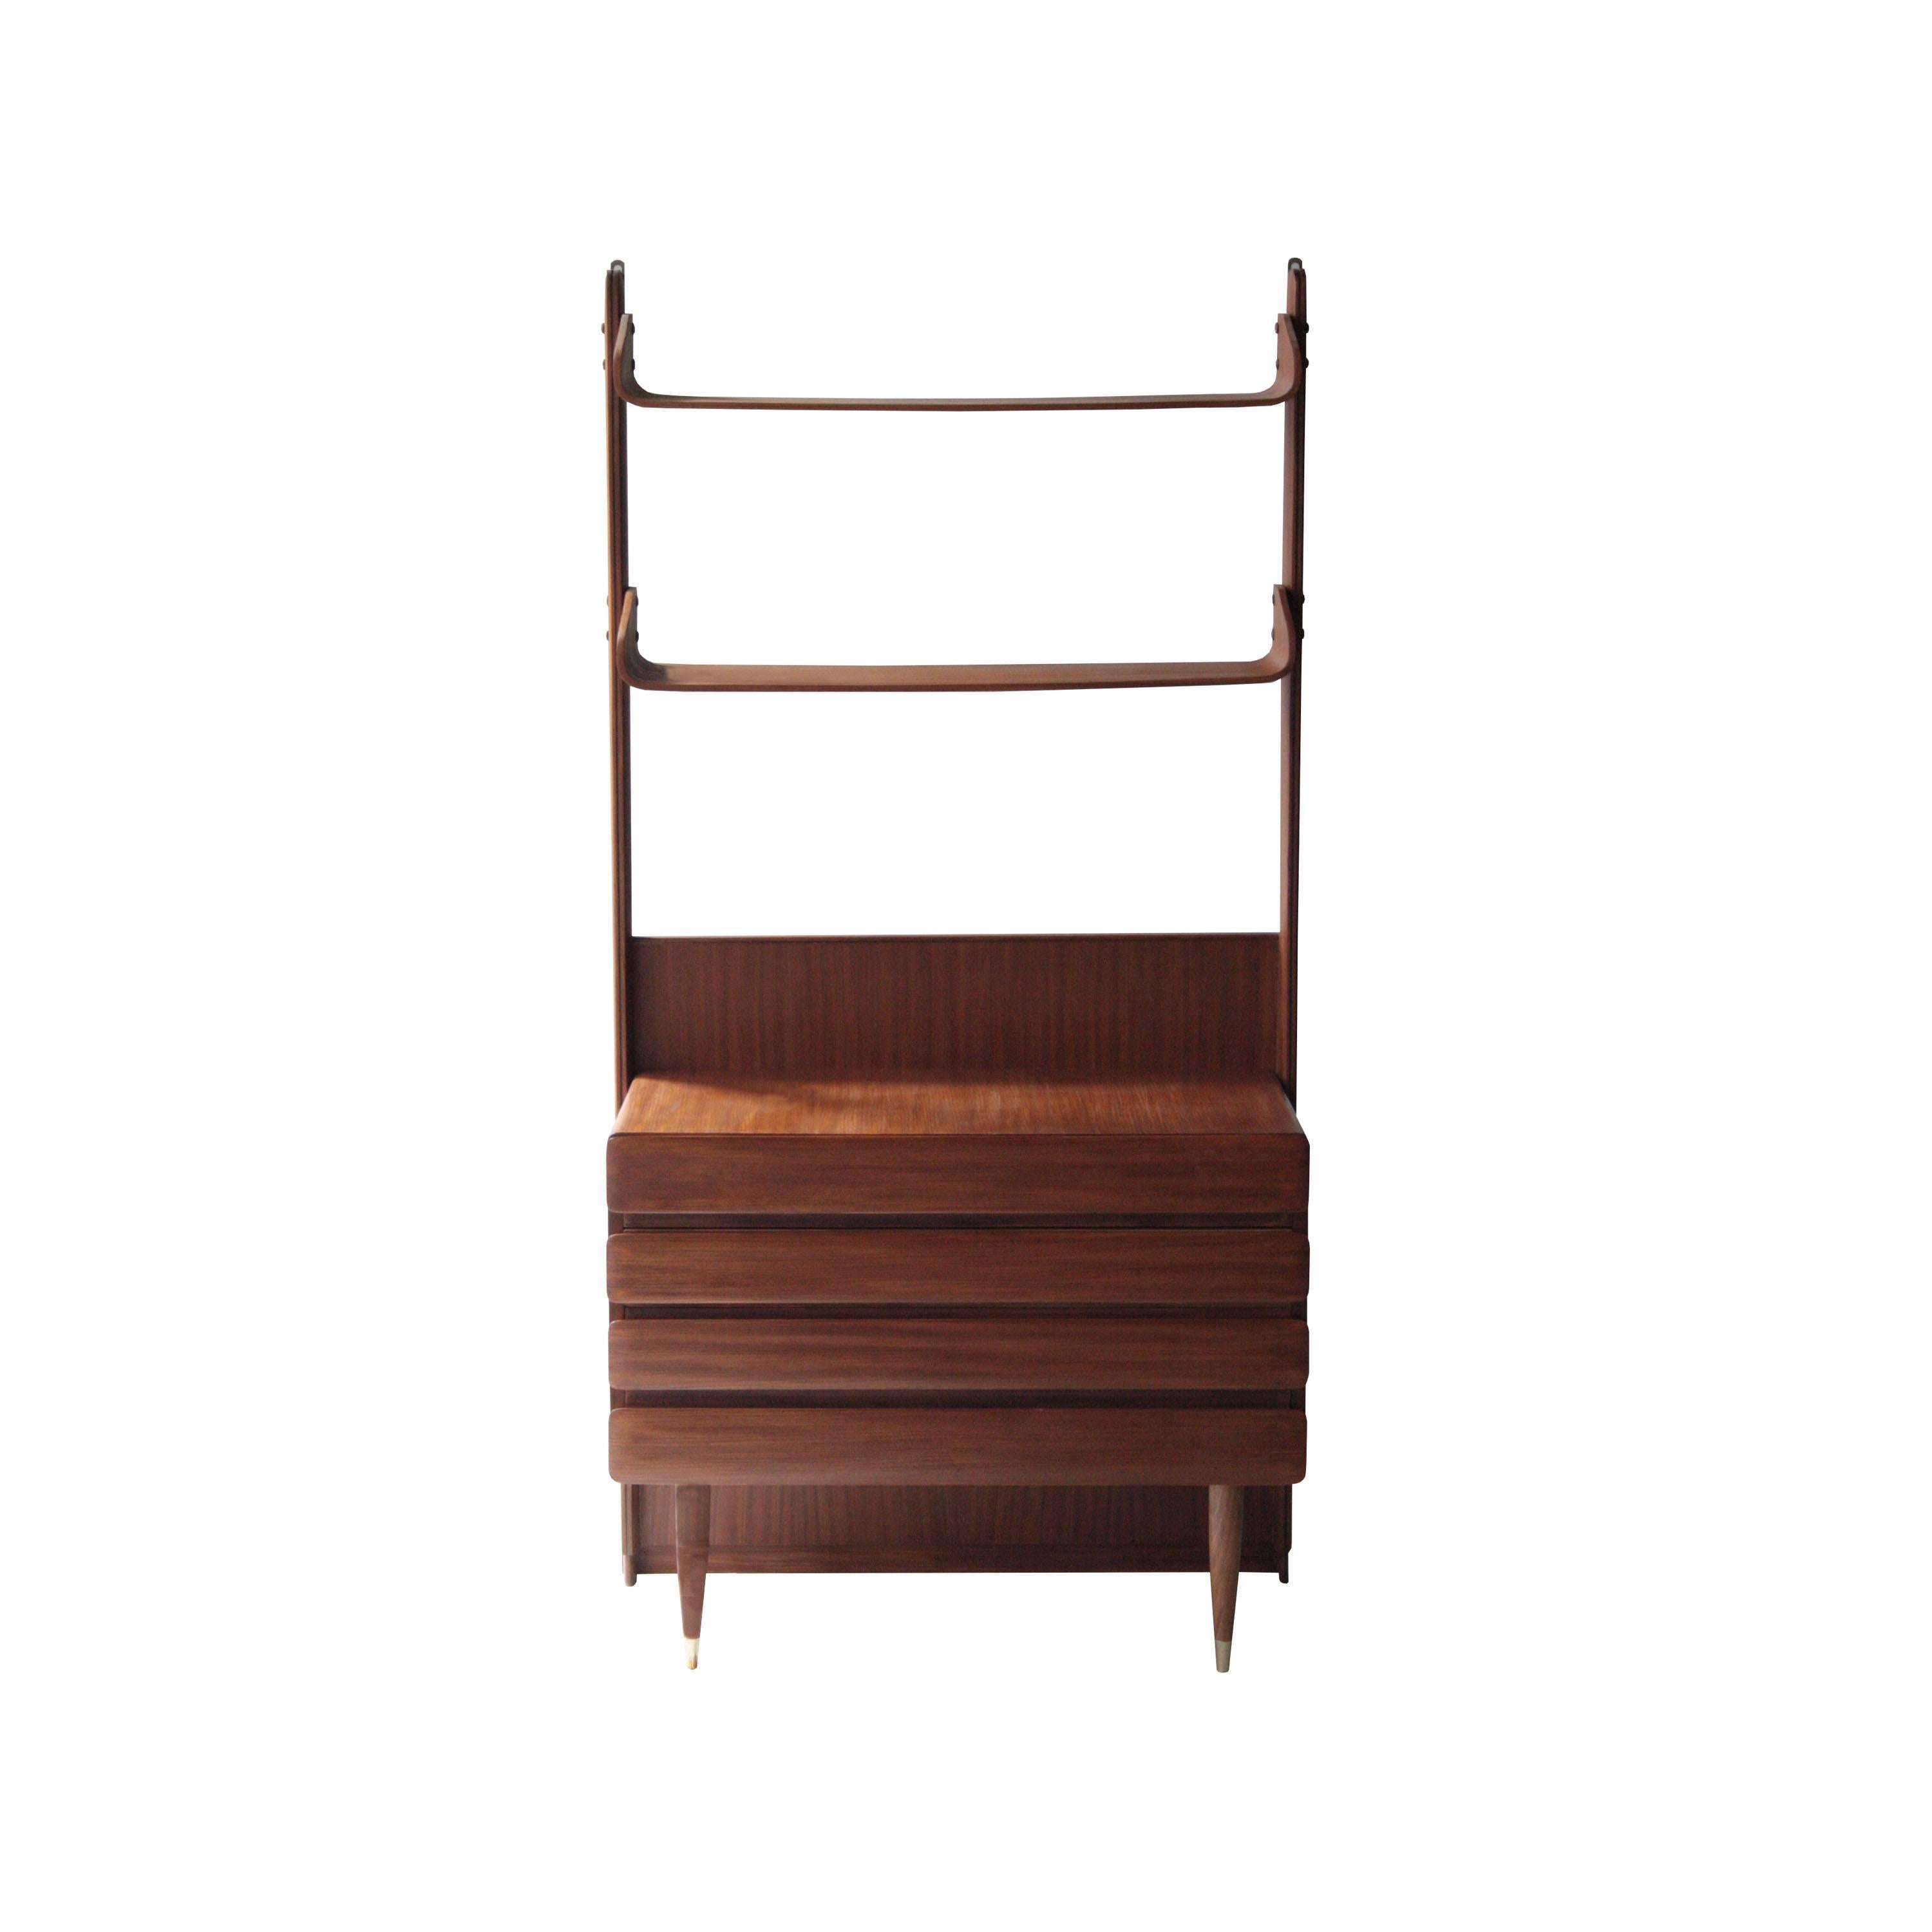 Pair of shelves in solid rosewood with shelves. Lower modules with drawers. Front feet with conical shape topped in brass detail.